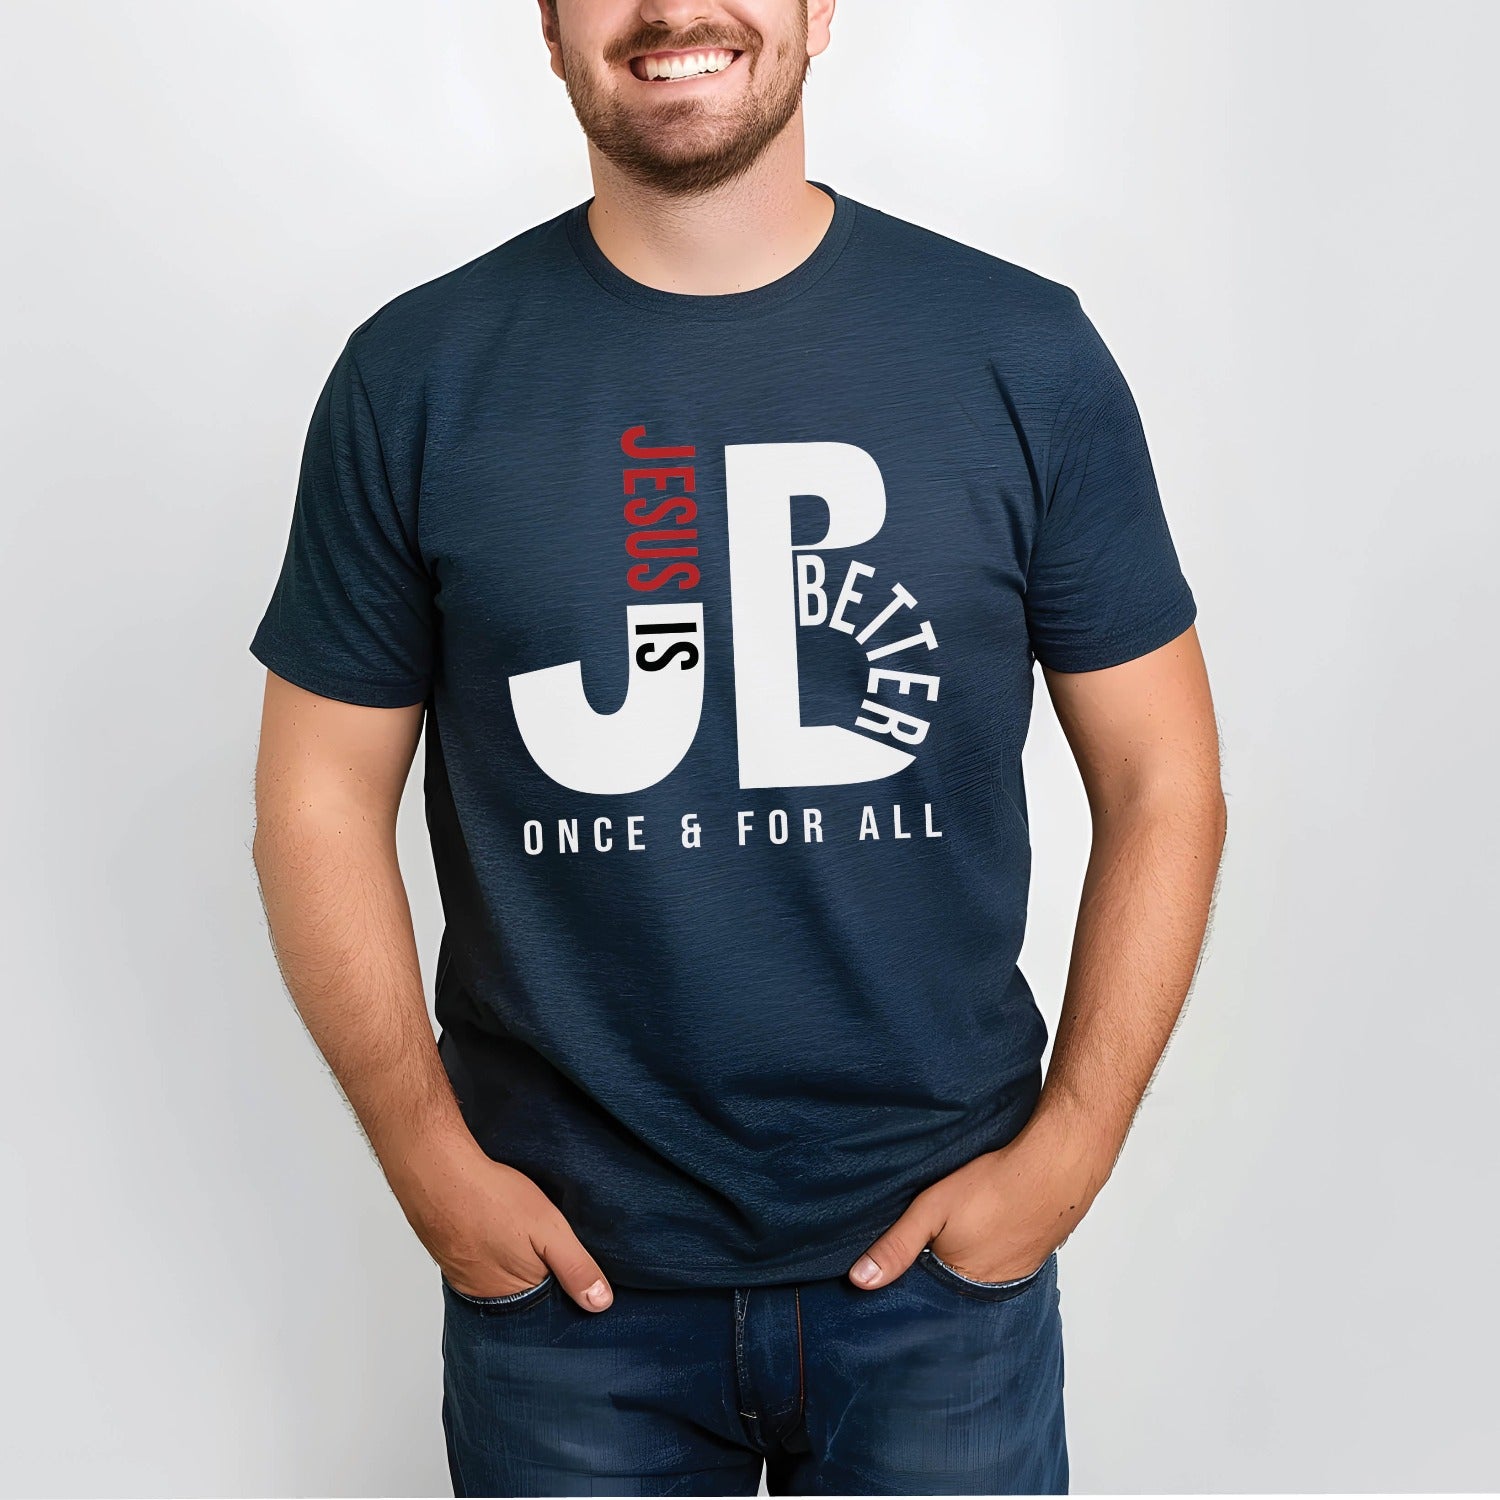 Man like a Dad wearing a "JB" typography "Jesus is Better Once and For All" design in white and red letters, based on the Christian bible book of Hebrews, printed on a navy blue color Unisex t-shirt, created for faith-based men and women, great gift for father's day